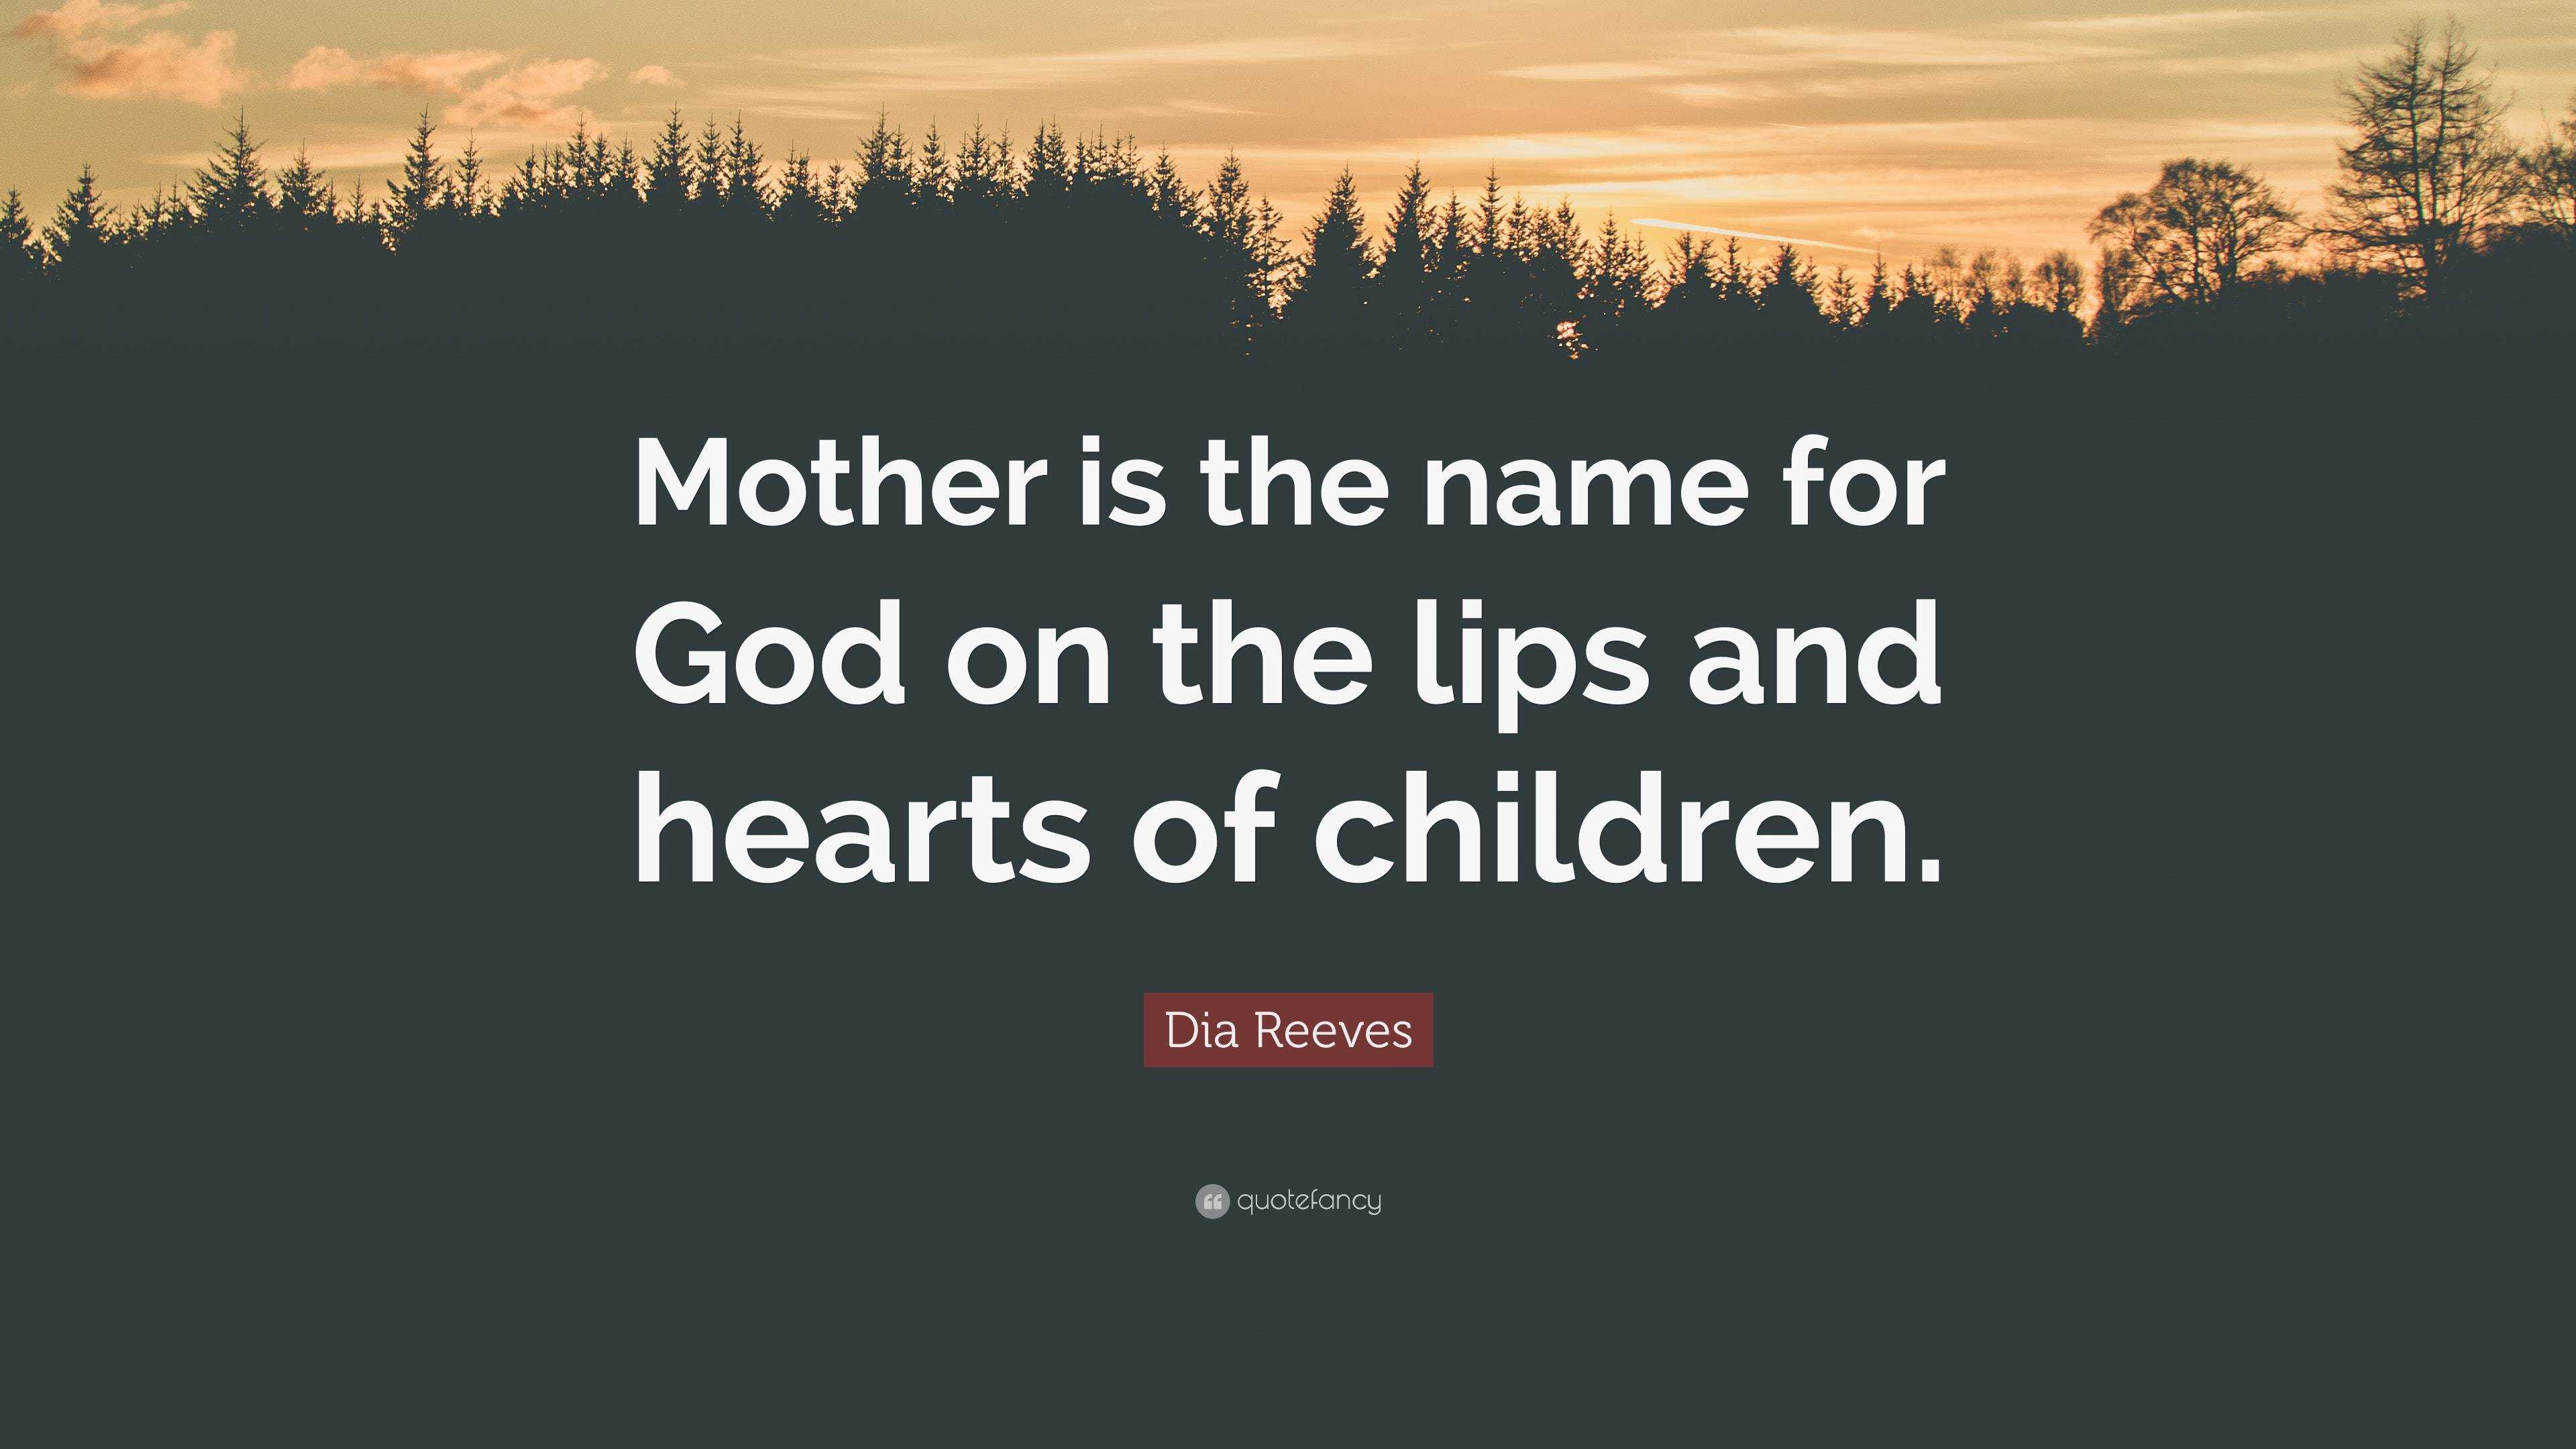 Dia Reeves Quote: “Mother is the name for God on the lips and hearts of ...